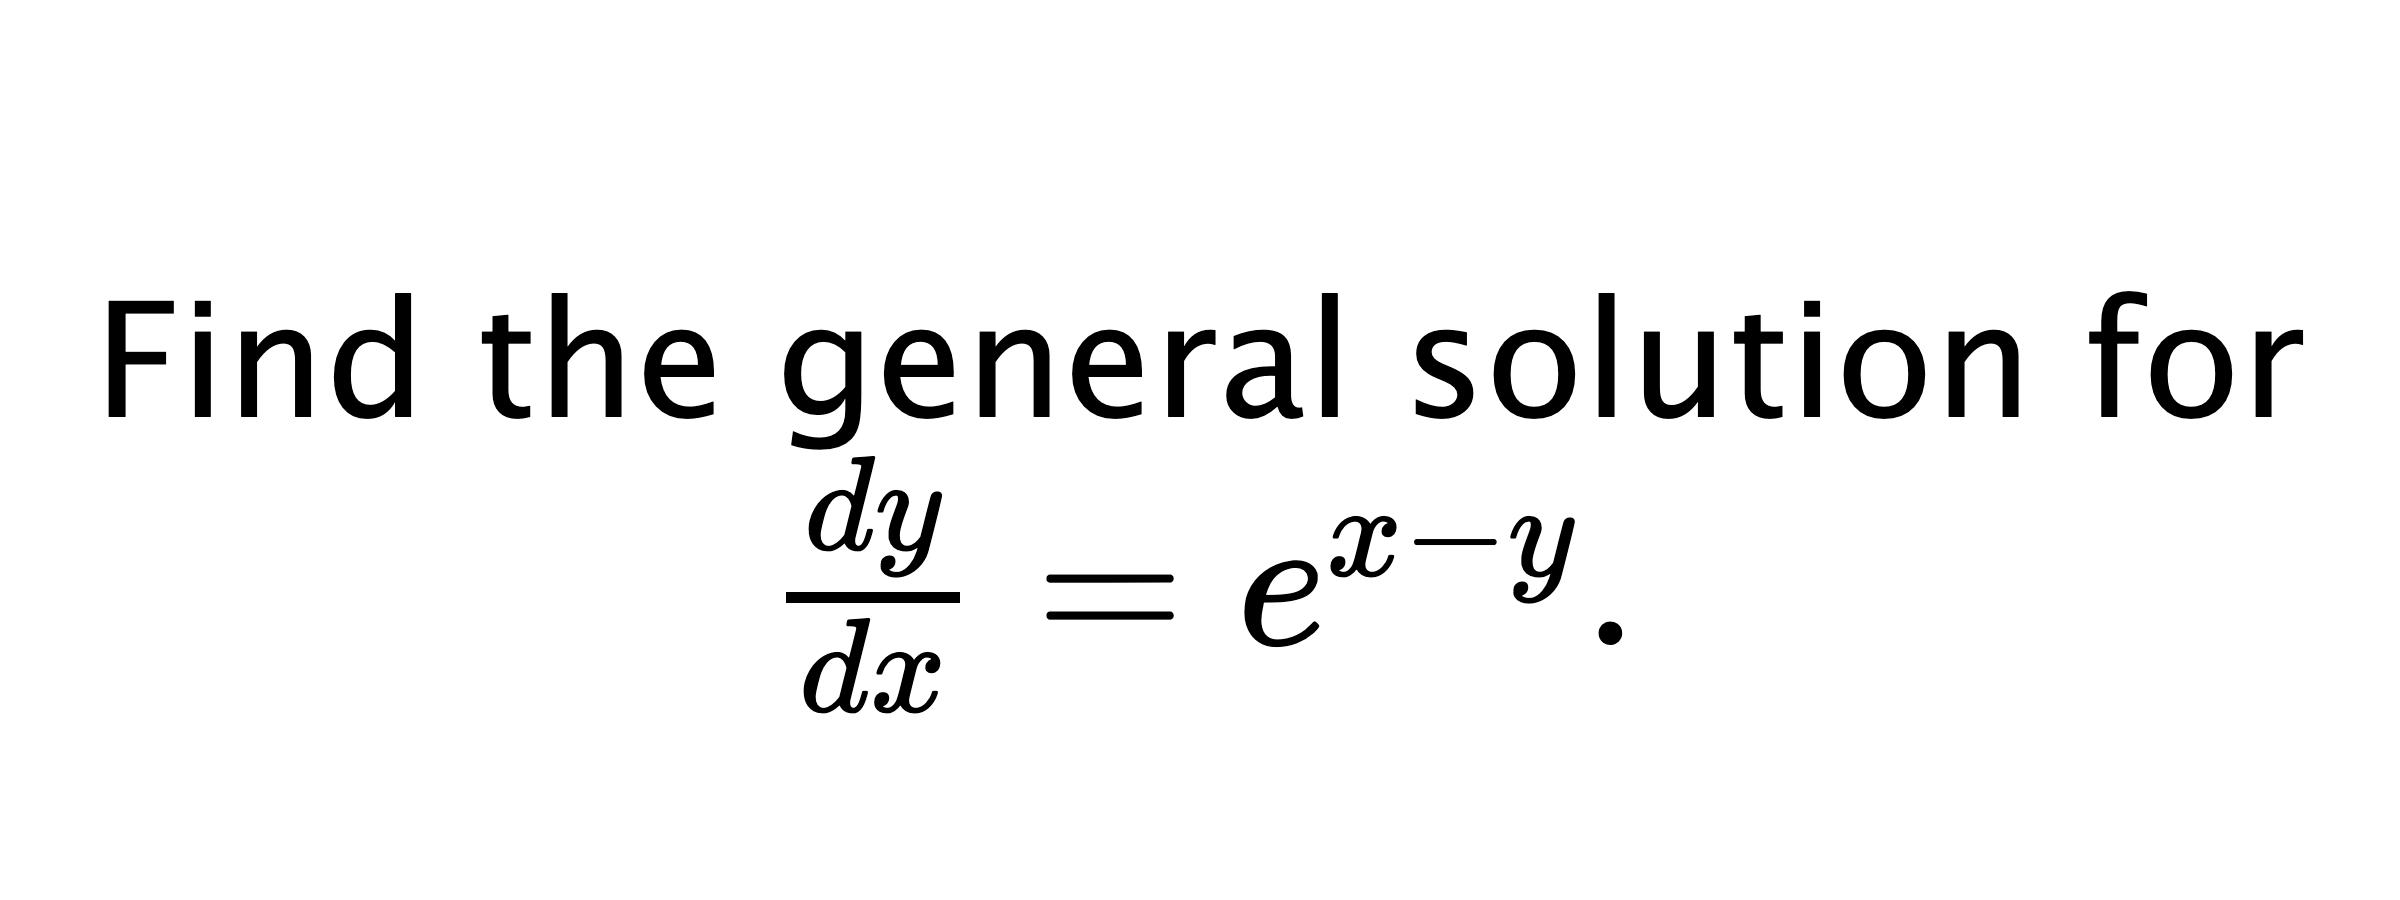  Find the general solution for $ \frac{dy}{dx}=e^{x-y}. $